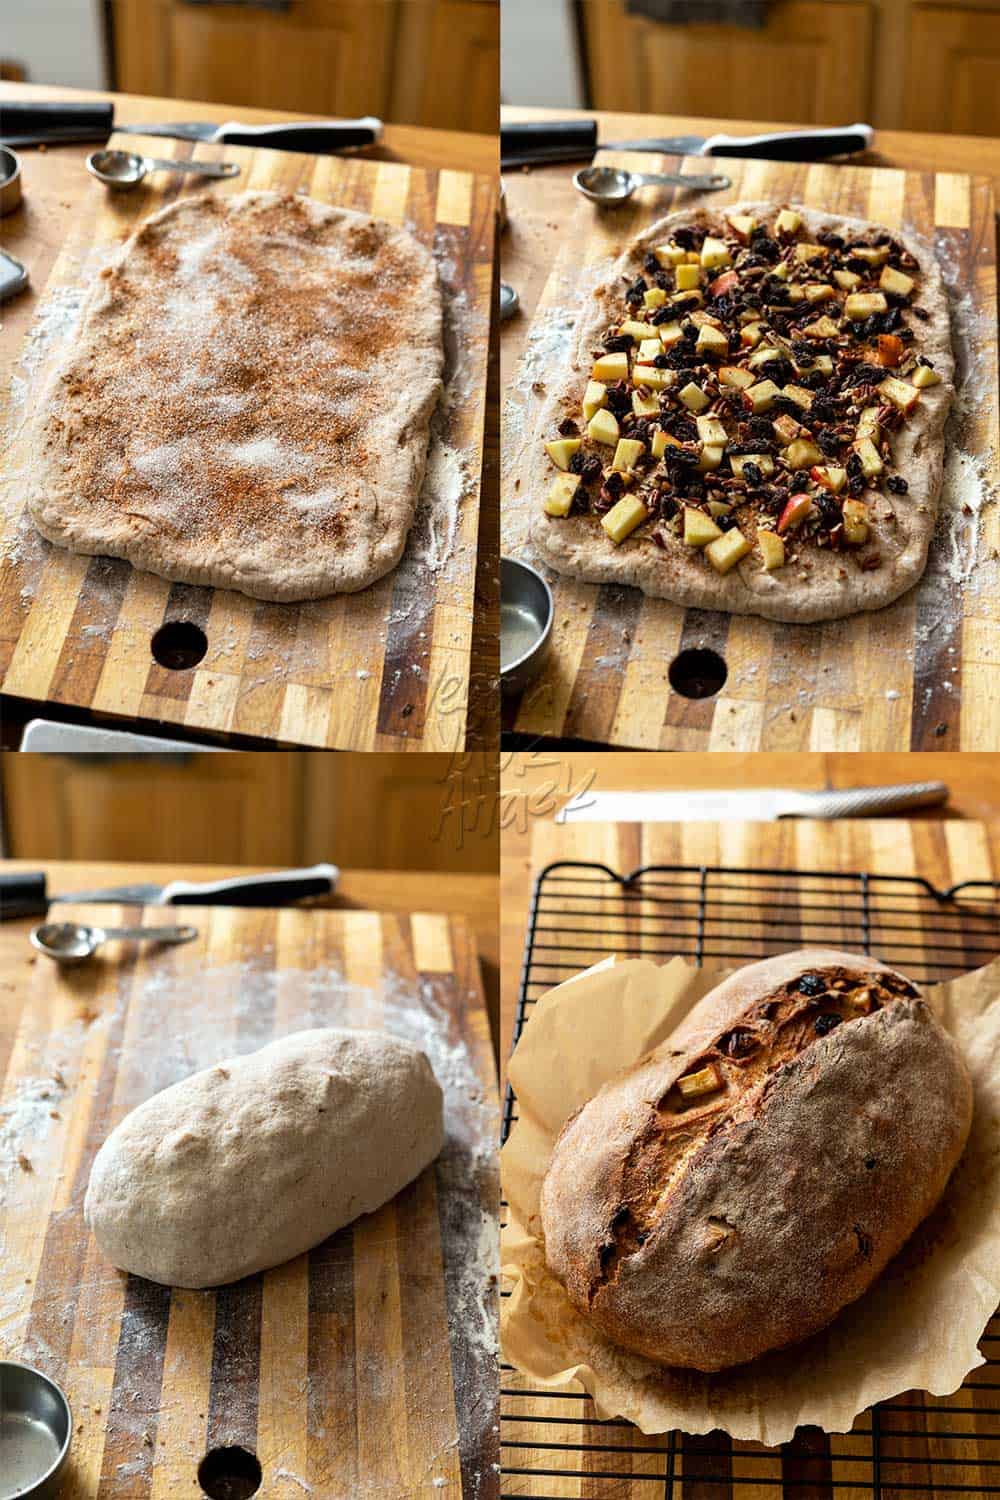 Image collage of folding apples, fruit, and nuts into whole wheat dough